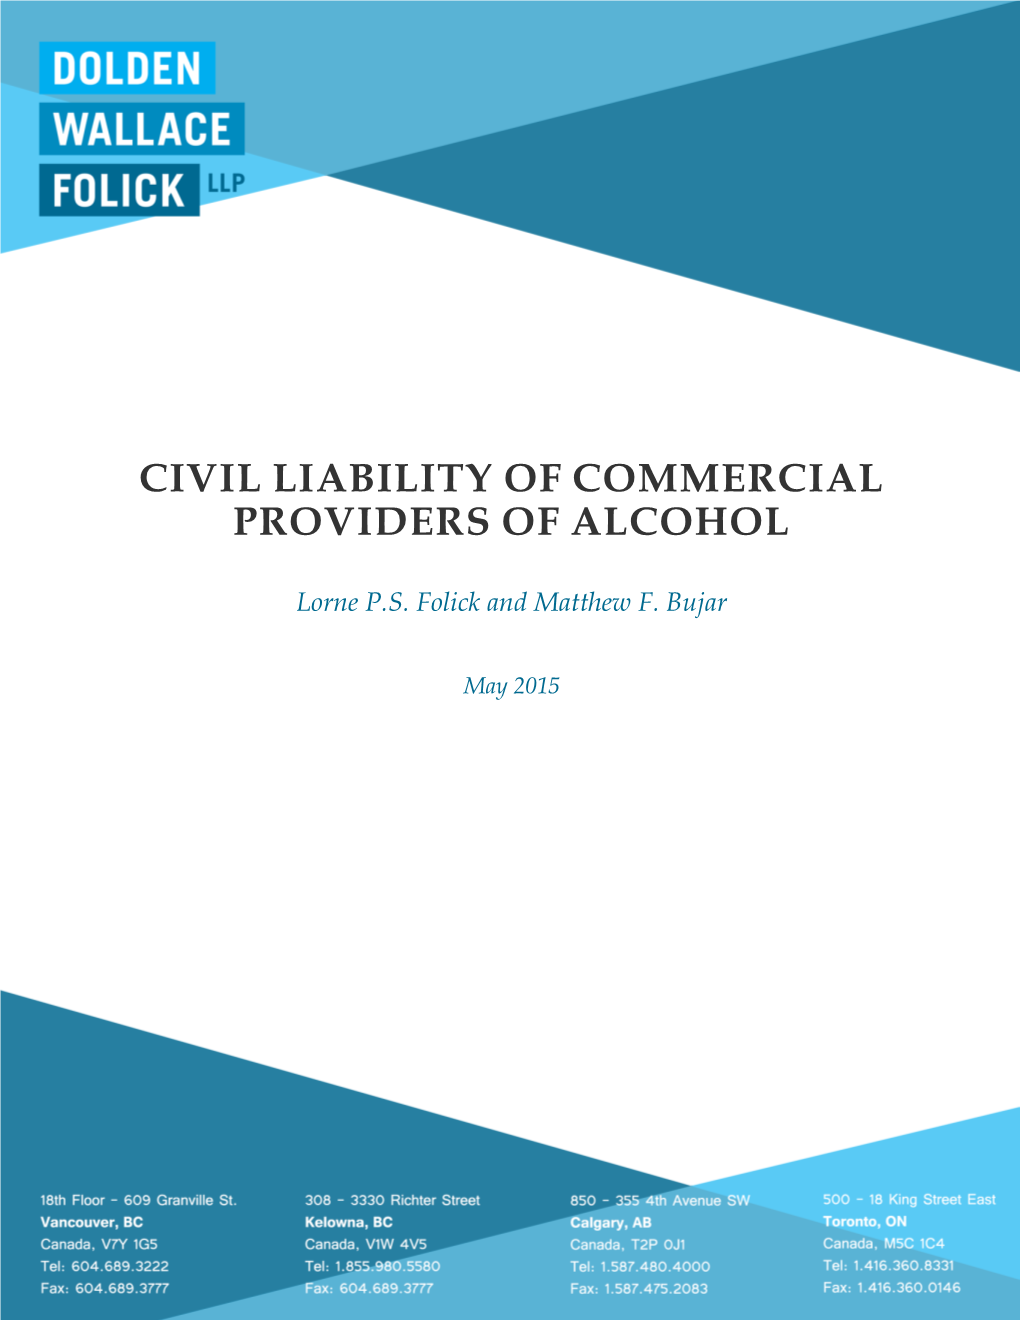 Civil Liability of Commercial Providers of Alcohol